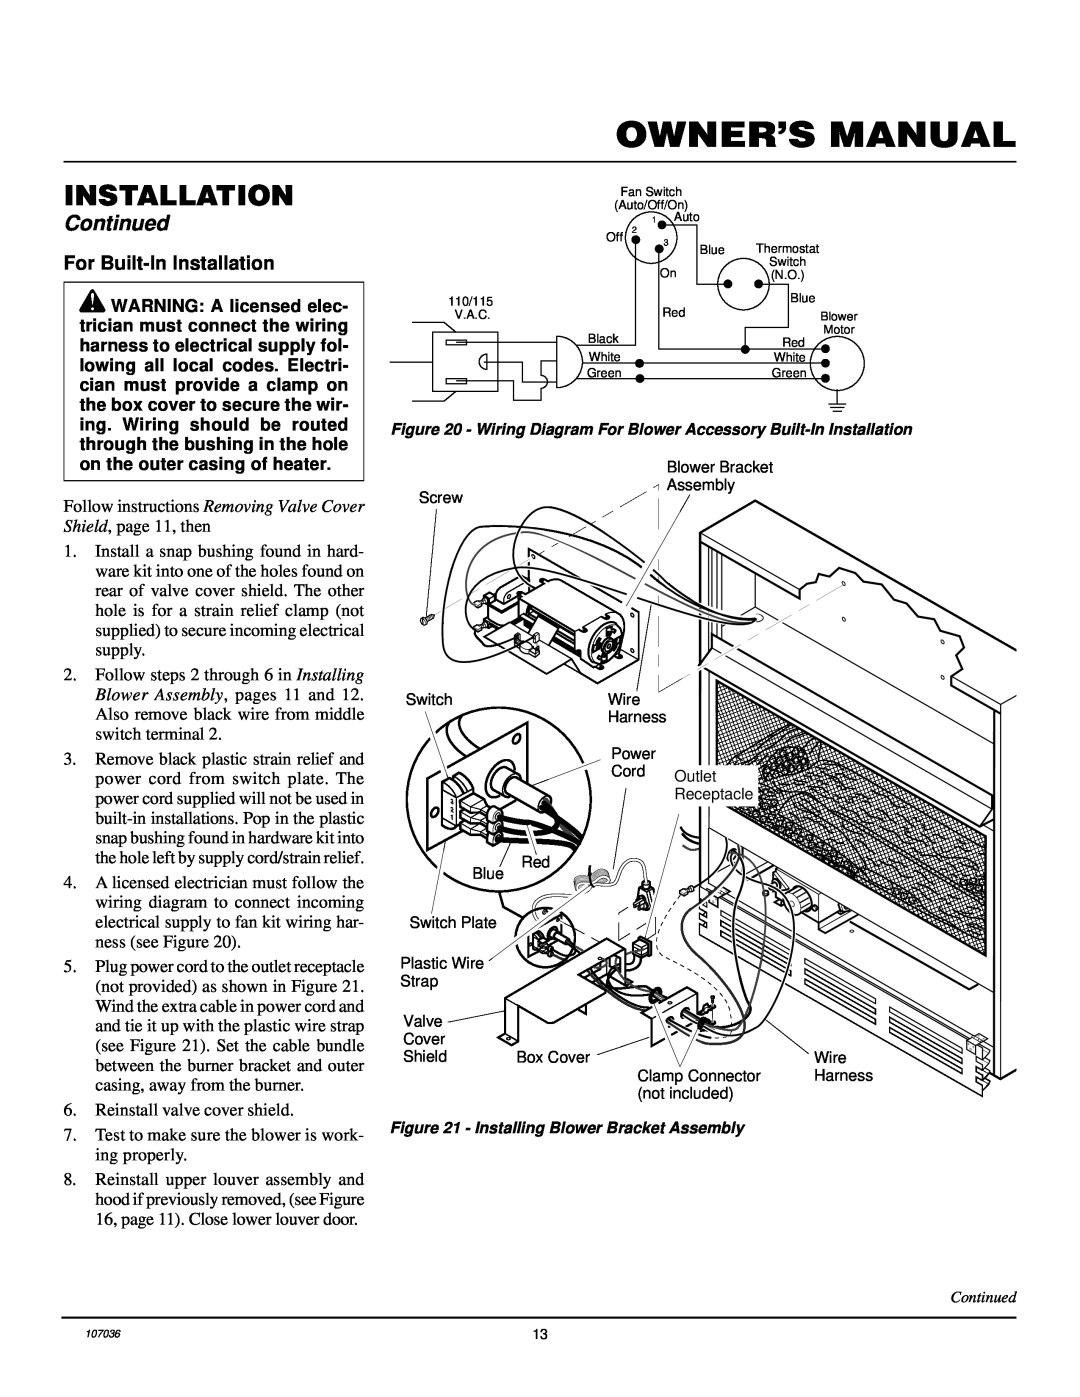 Desa CGCFTP 14, 000 to 26 installation manual For Built-InInstallation, Continued 